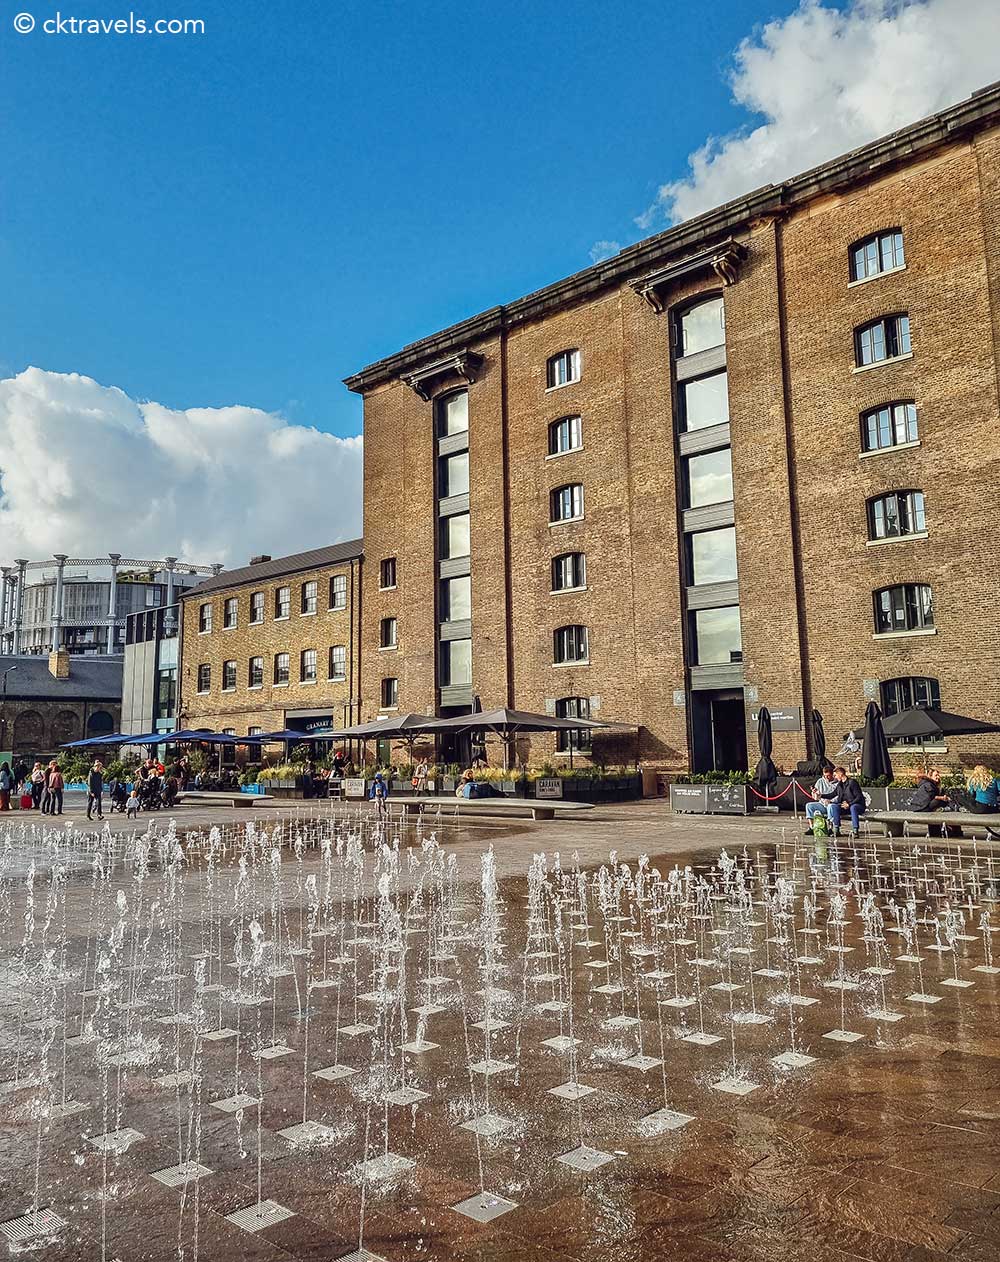 Granary Square Fountains King's Cross London